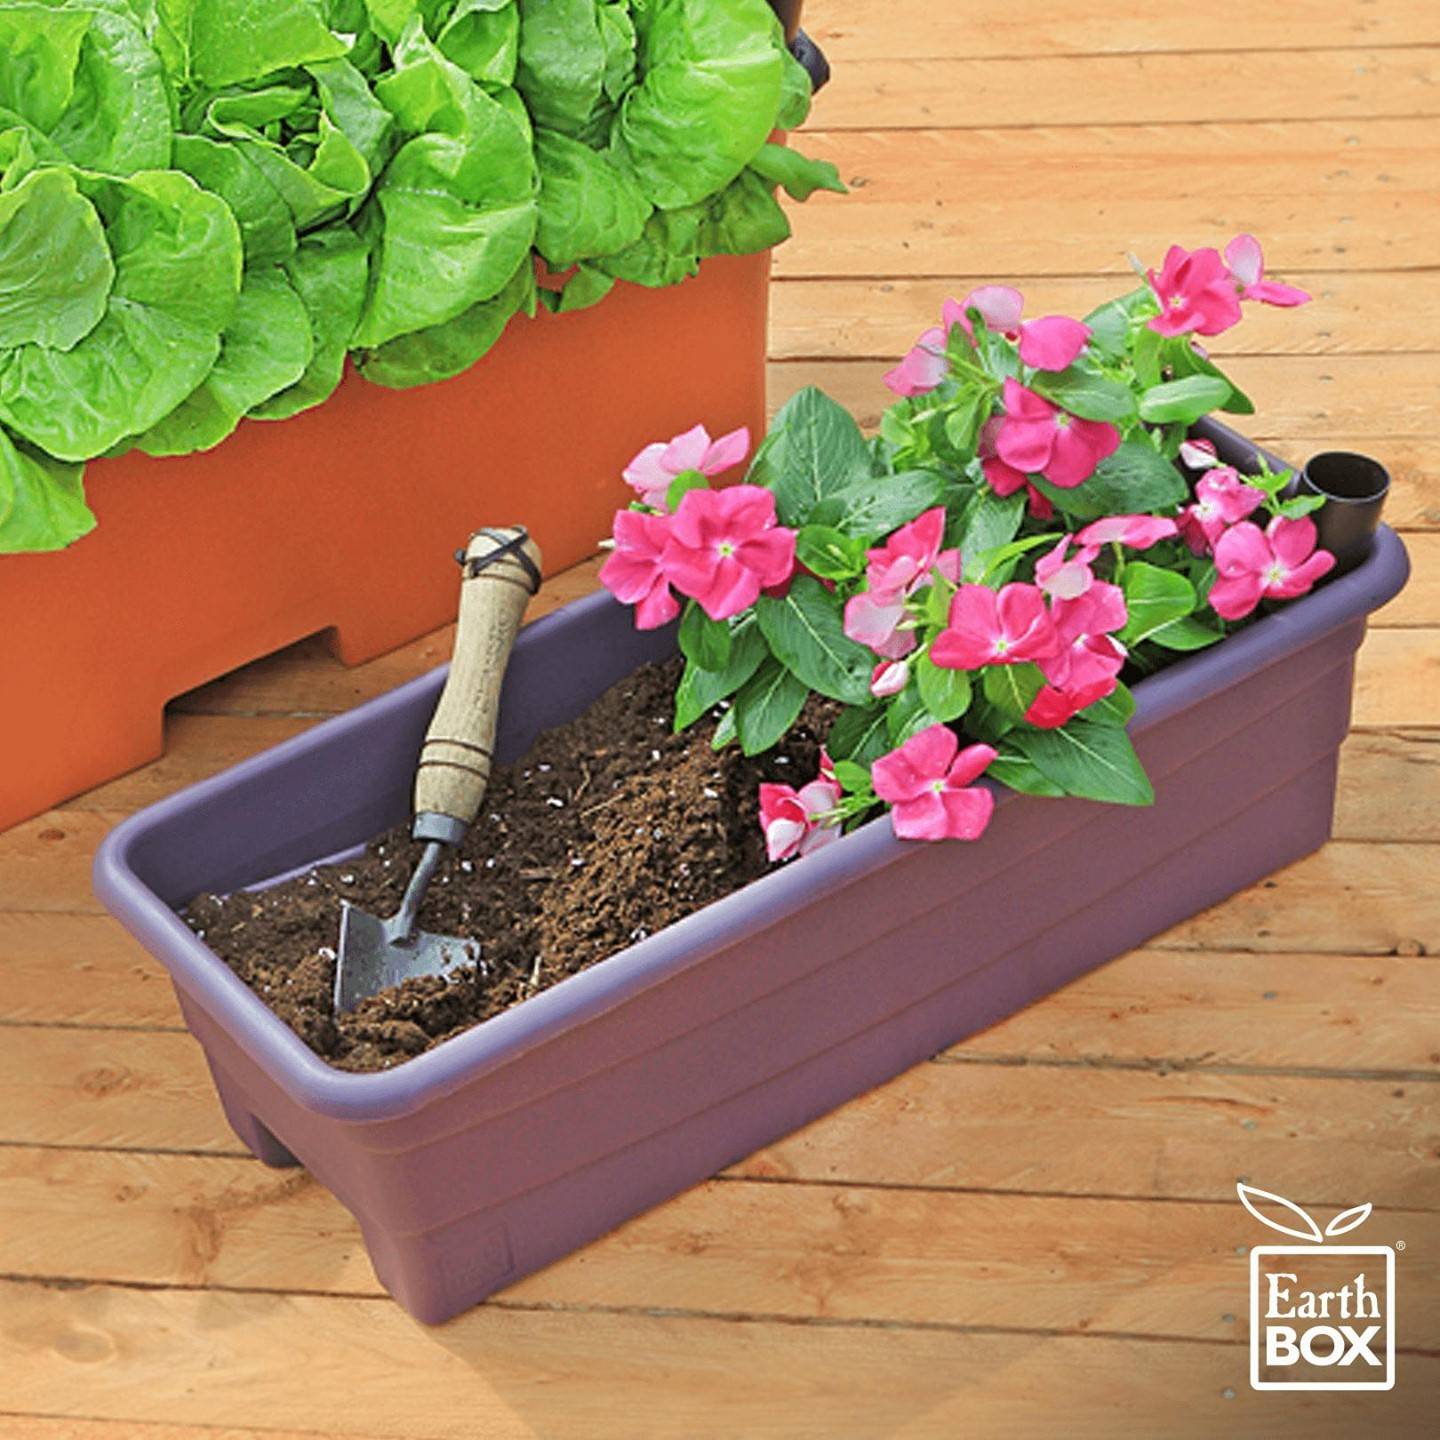 Flowers growing in a small container gardening system